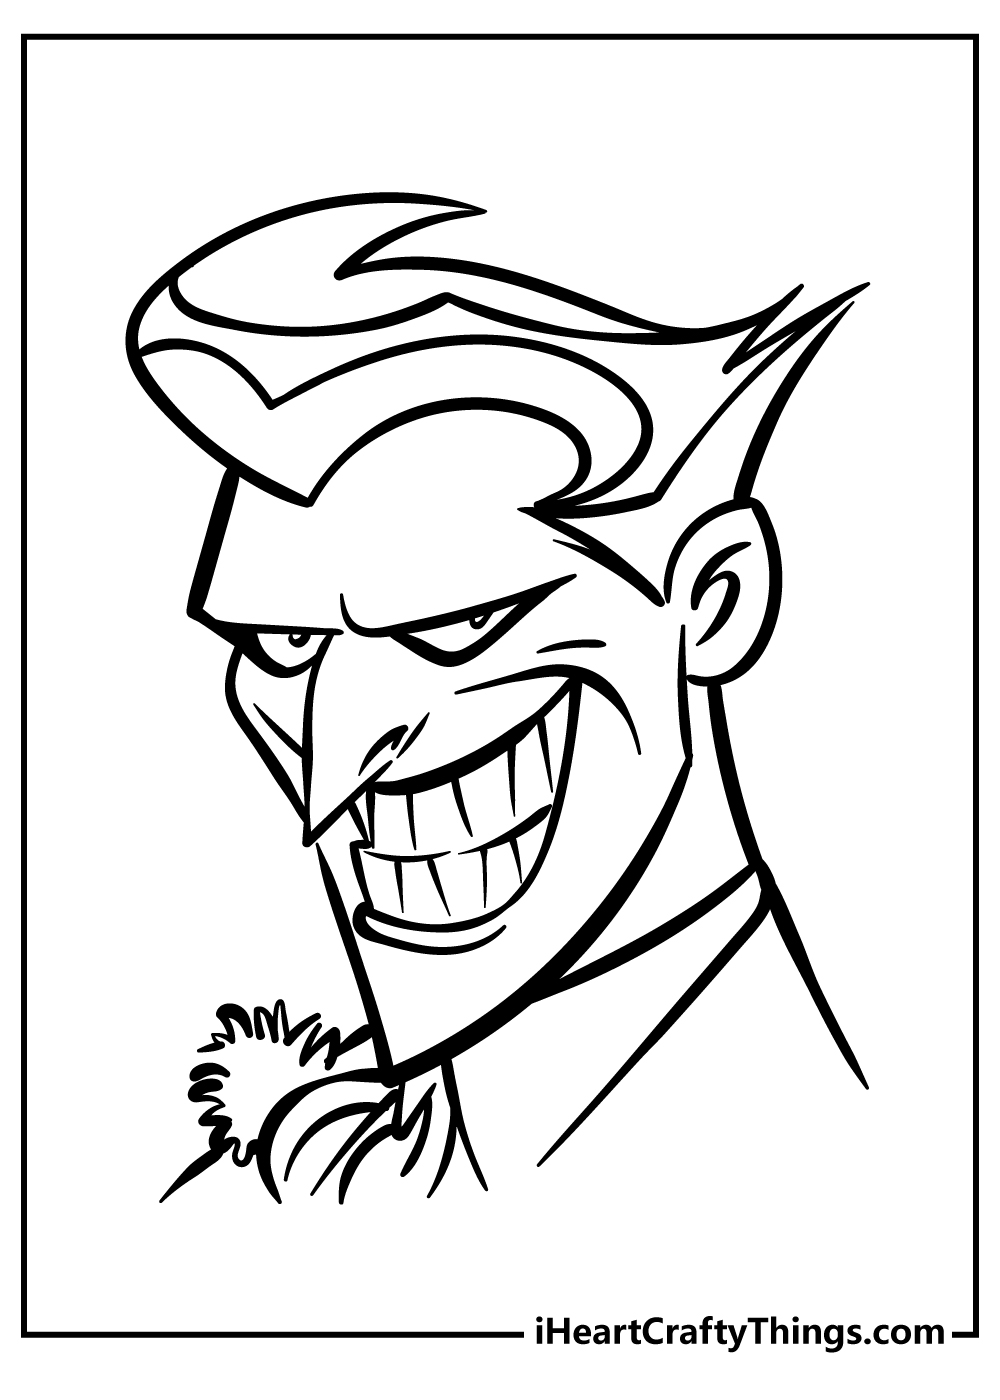 Joker coloring pages free printables